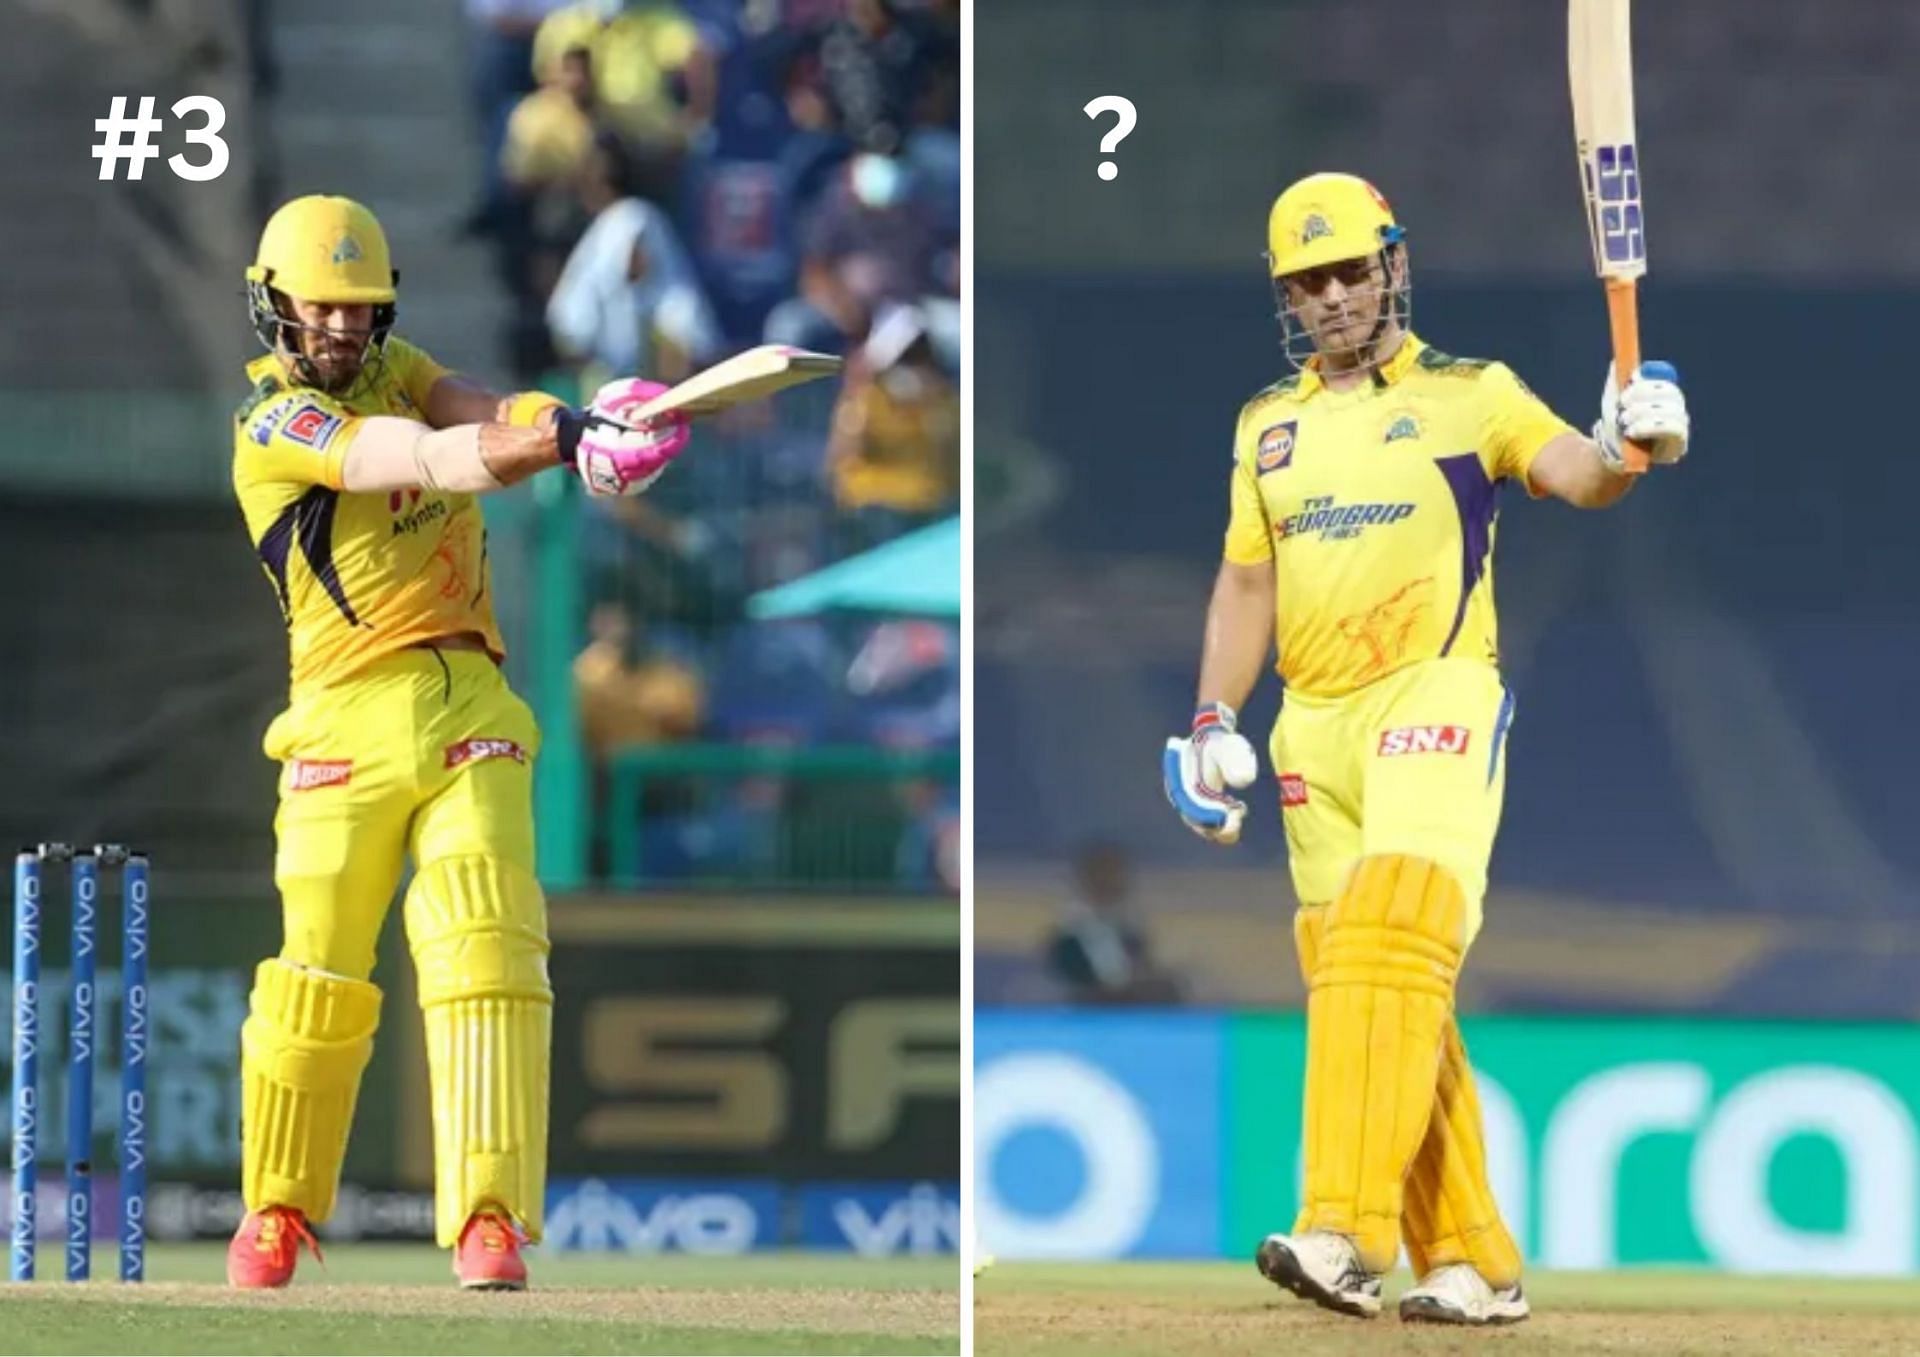 Faf du Plessis and MS Dhoni - true CSK stalwarts in every sense (Picture Credits: IPL).